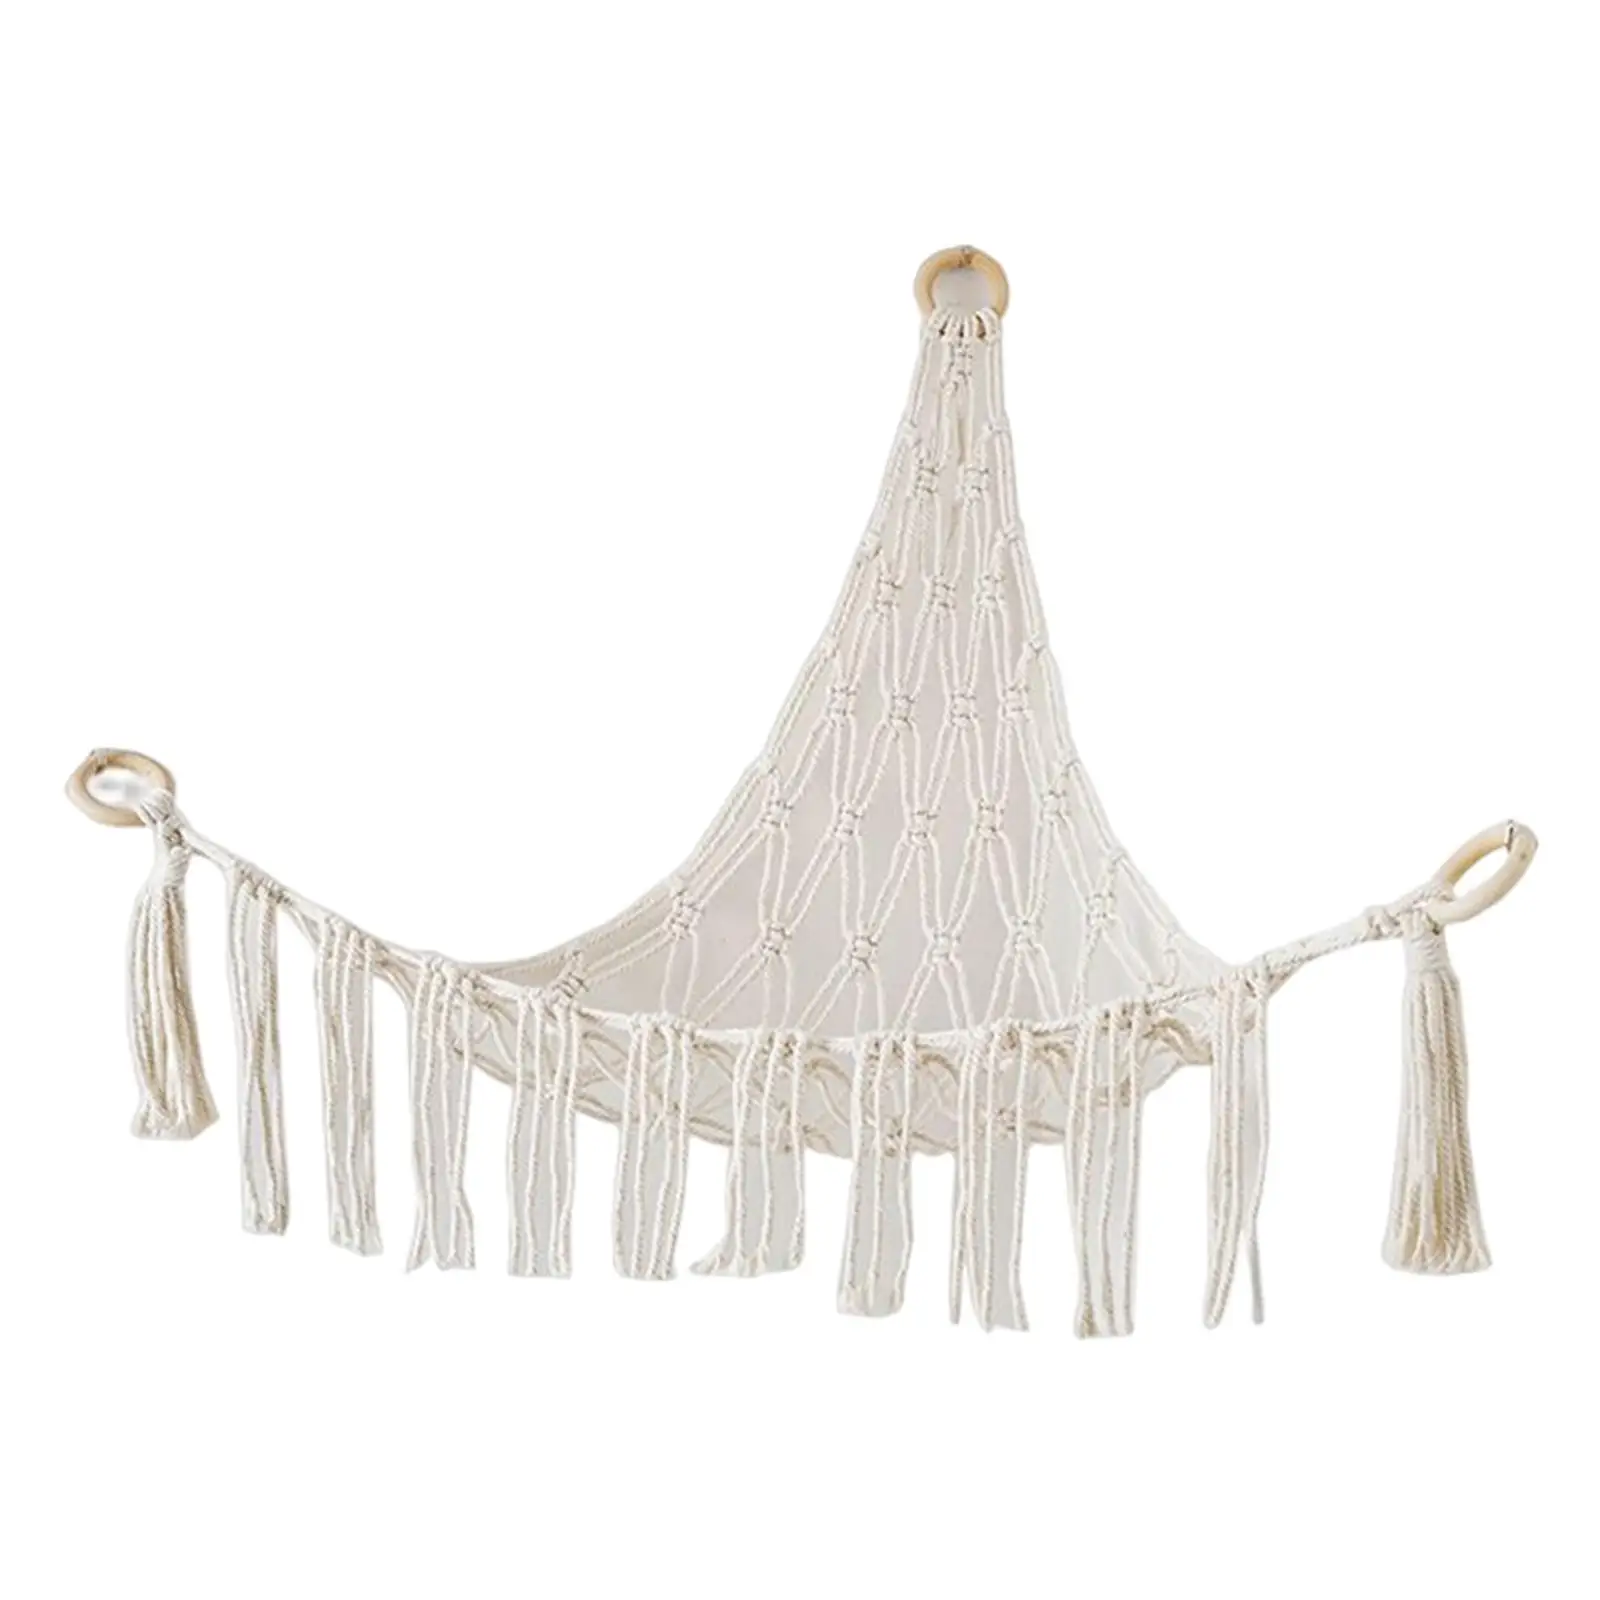 Boho Toy Hammock with Tassels Display Holder Soft with Hook Stuffed Toy Storage Net for Bedroom Home Decoration Birthday Gift